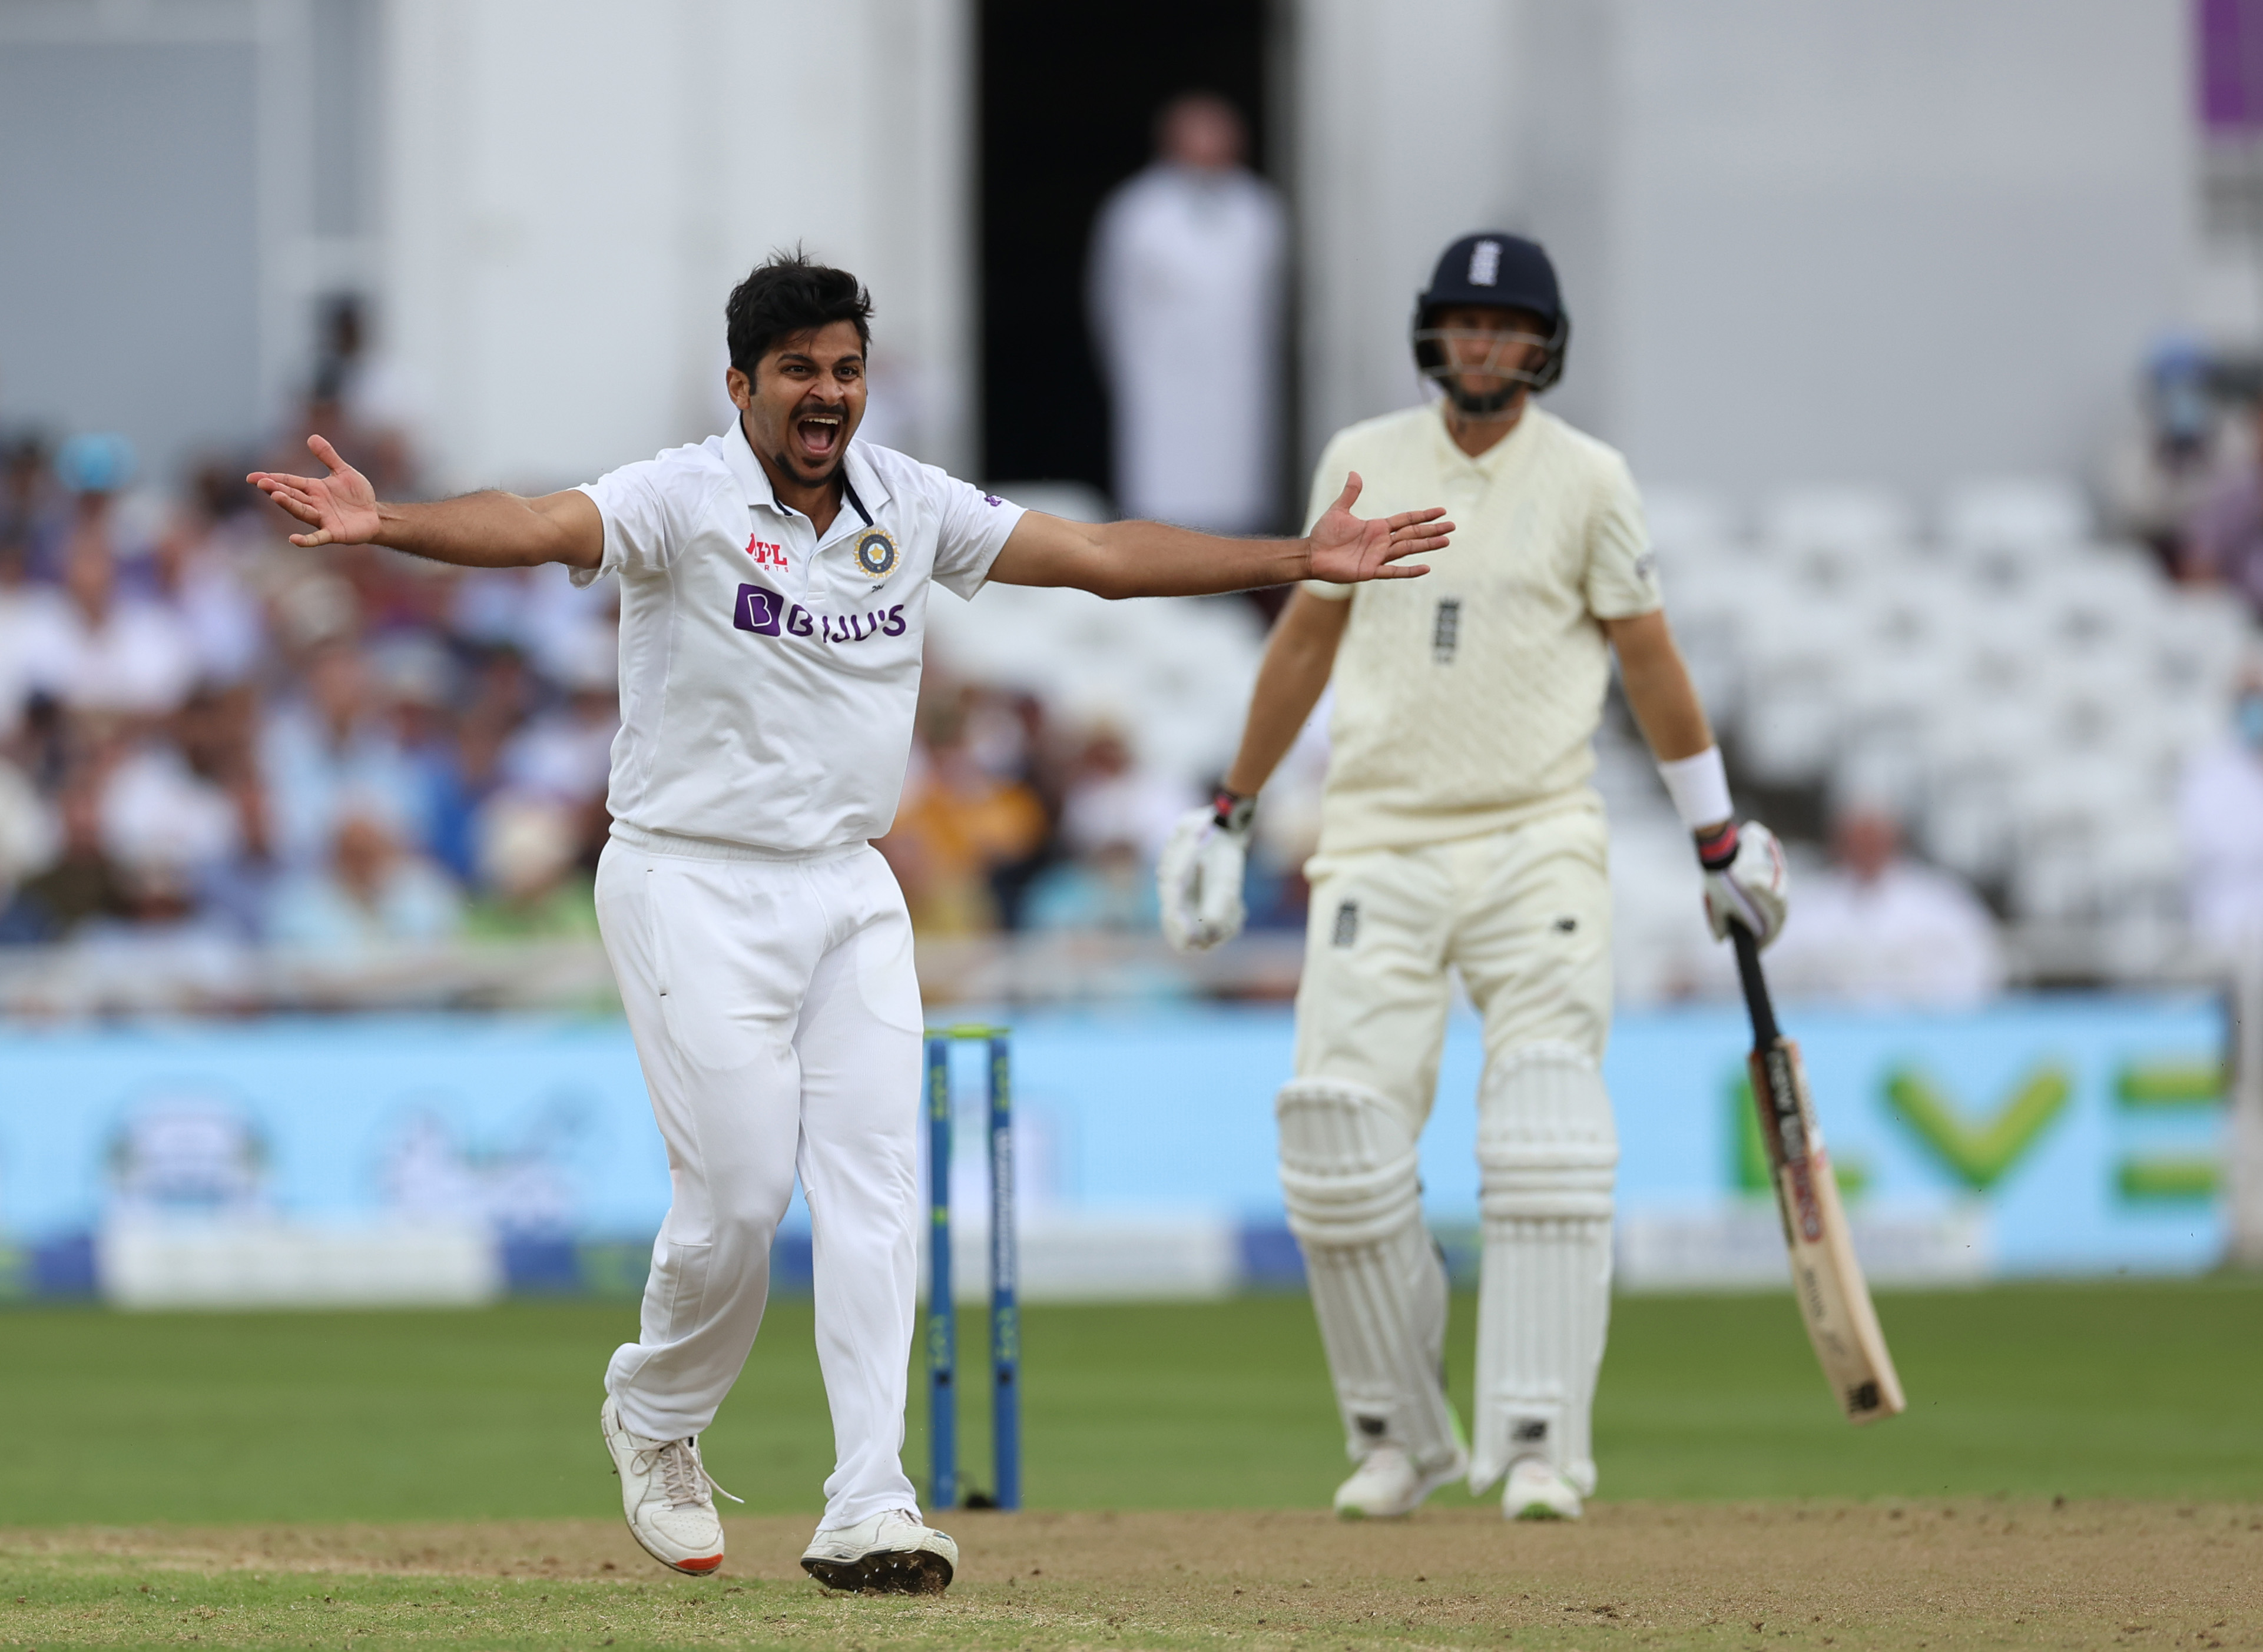 IND vs ENG | Twitter reacts to Shardul Thakur, Virat Kohli's pumped up reaction following Rory Burns's wicket 